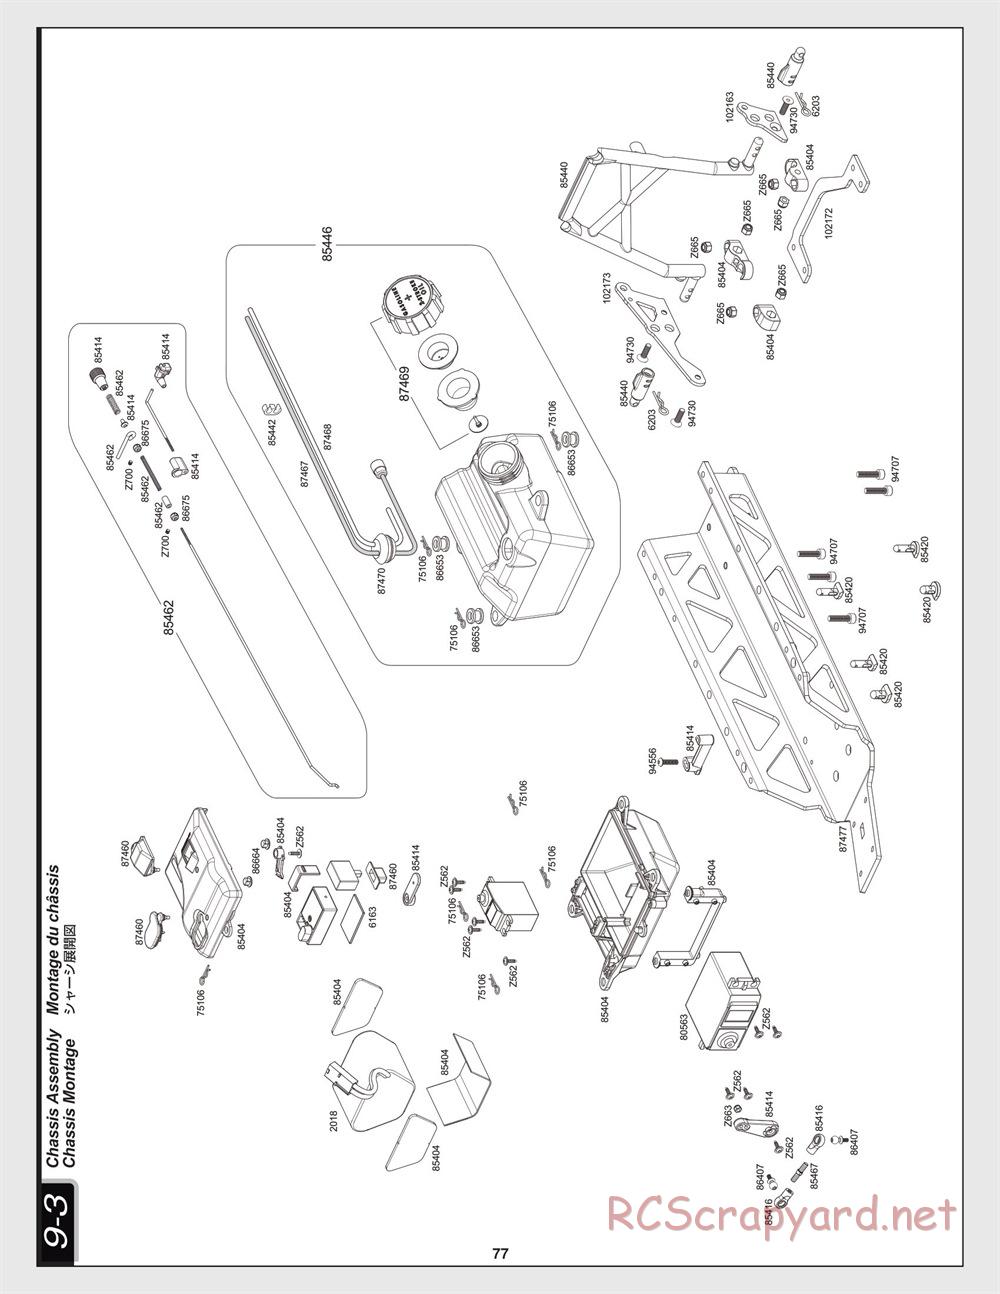 HPI - Baja 5B 2.0 - Exploded View - Page 77